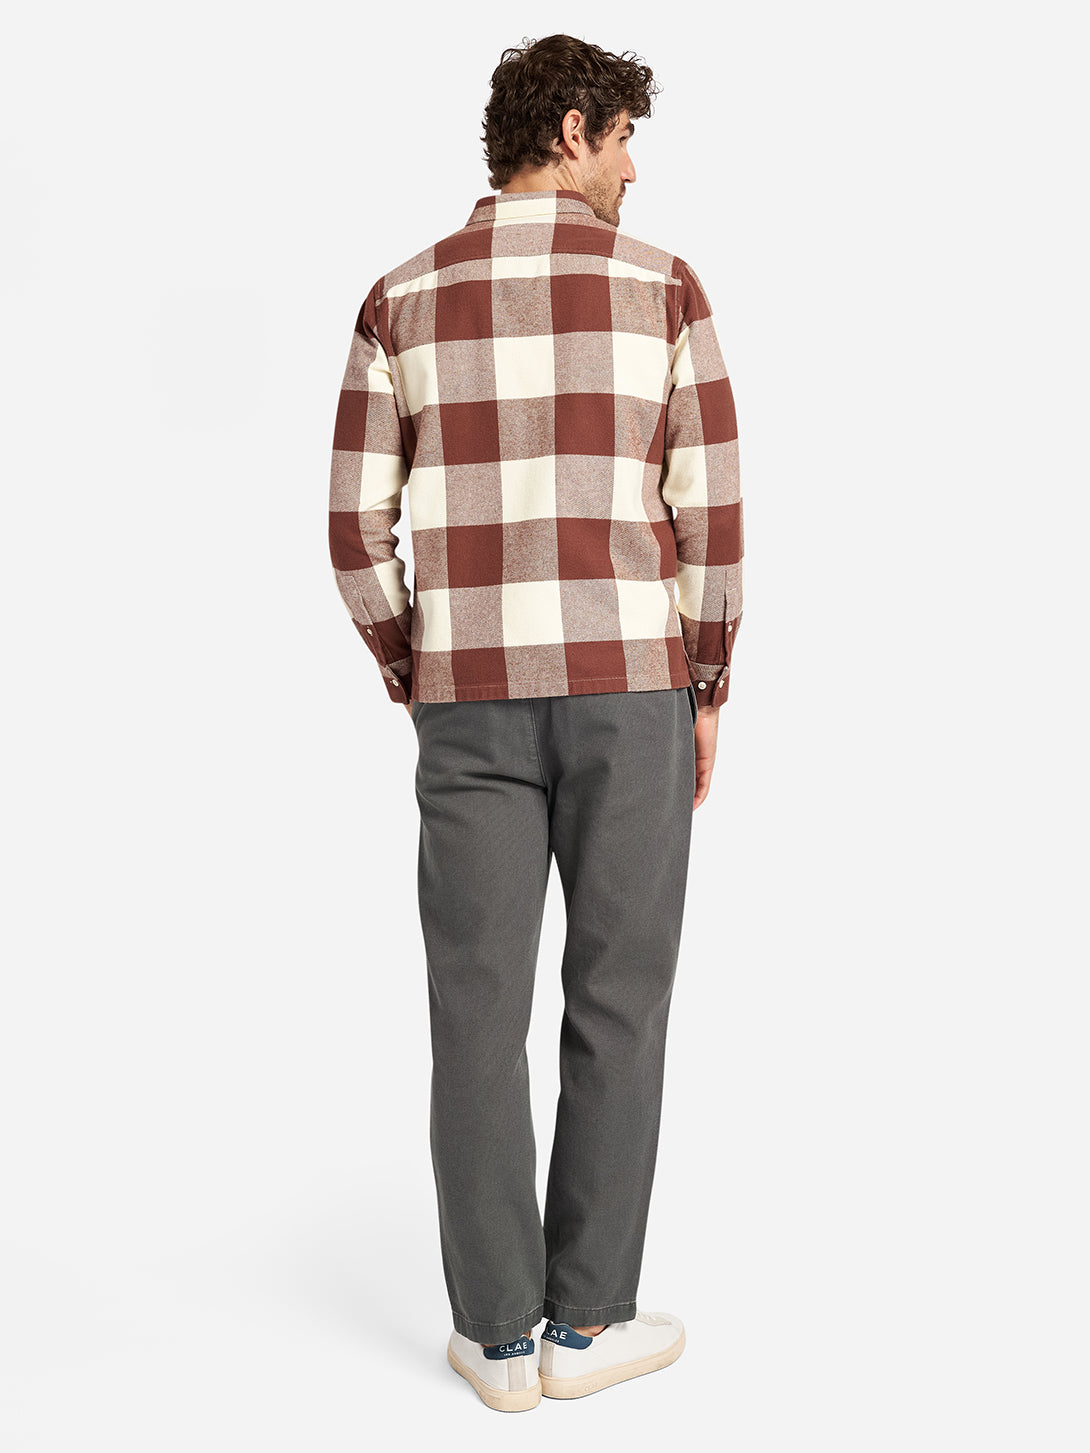 Brown/Off White Check Vance Checkered Flannel Shirt Men's ONS Button Up